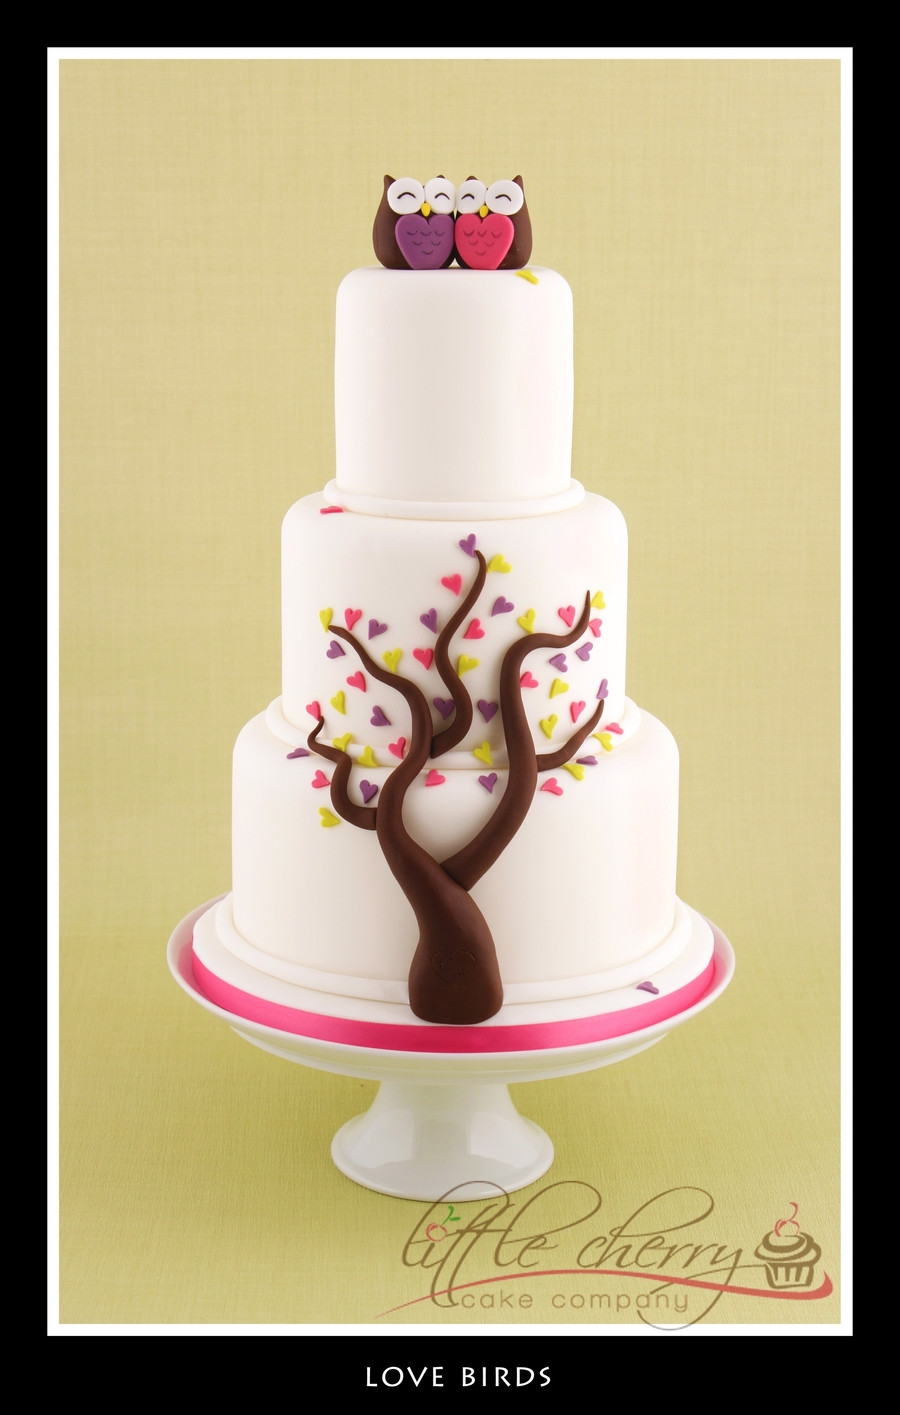 Love Birds Wedding Cakes
 Love Birds Wedding Cake CakeCentral